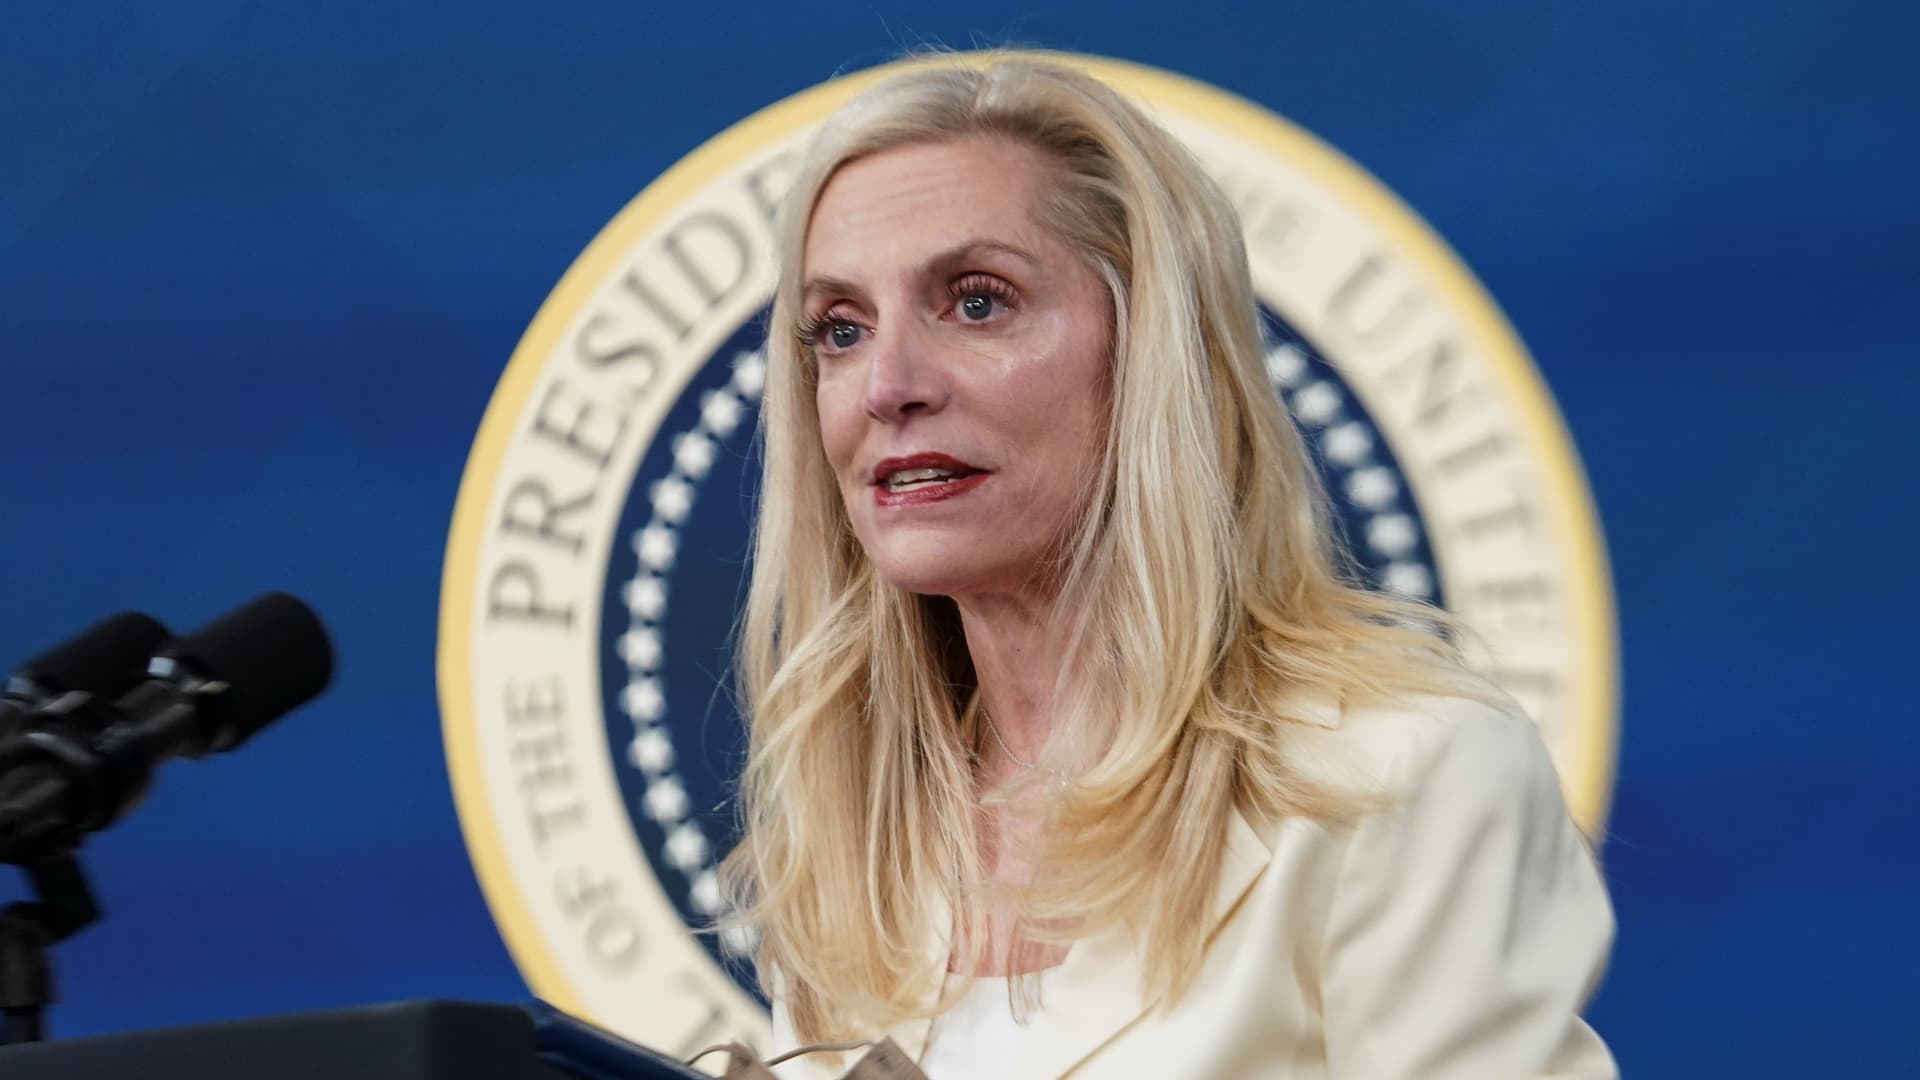 Fed Vice Chair Lael Brainard says it’s hard to see the case for the Fed pausing rate hikes